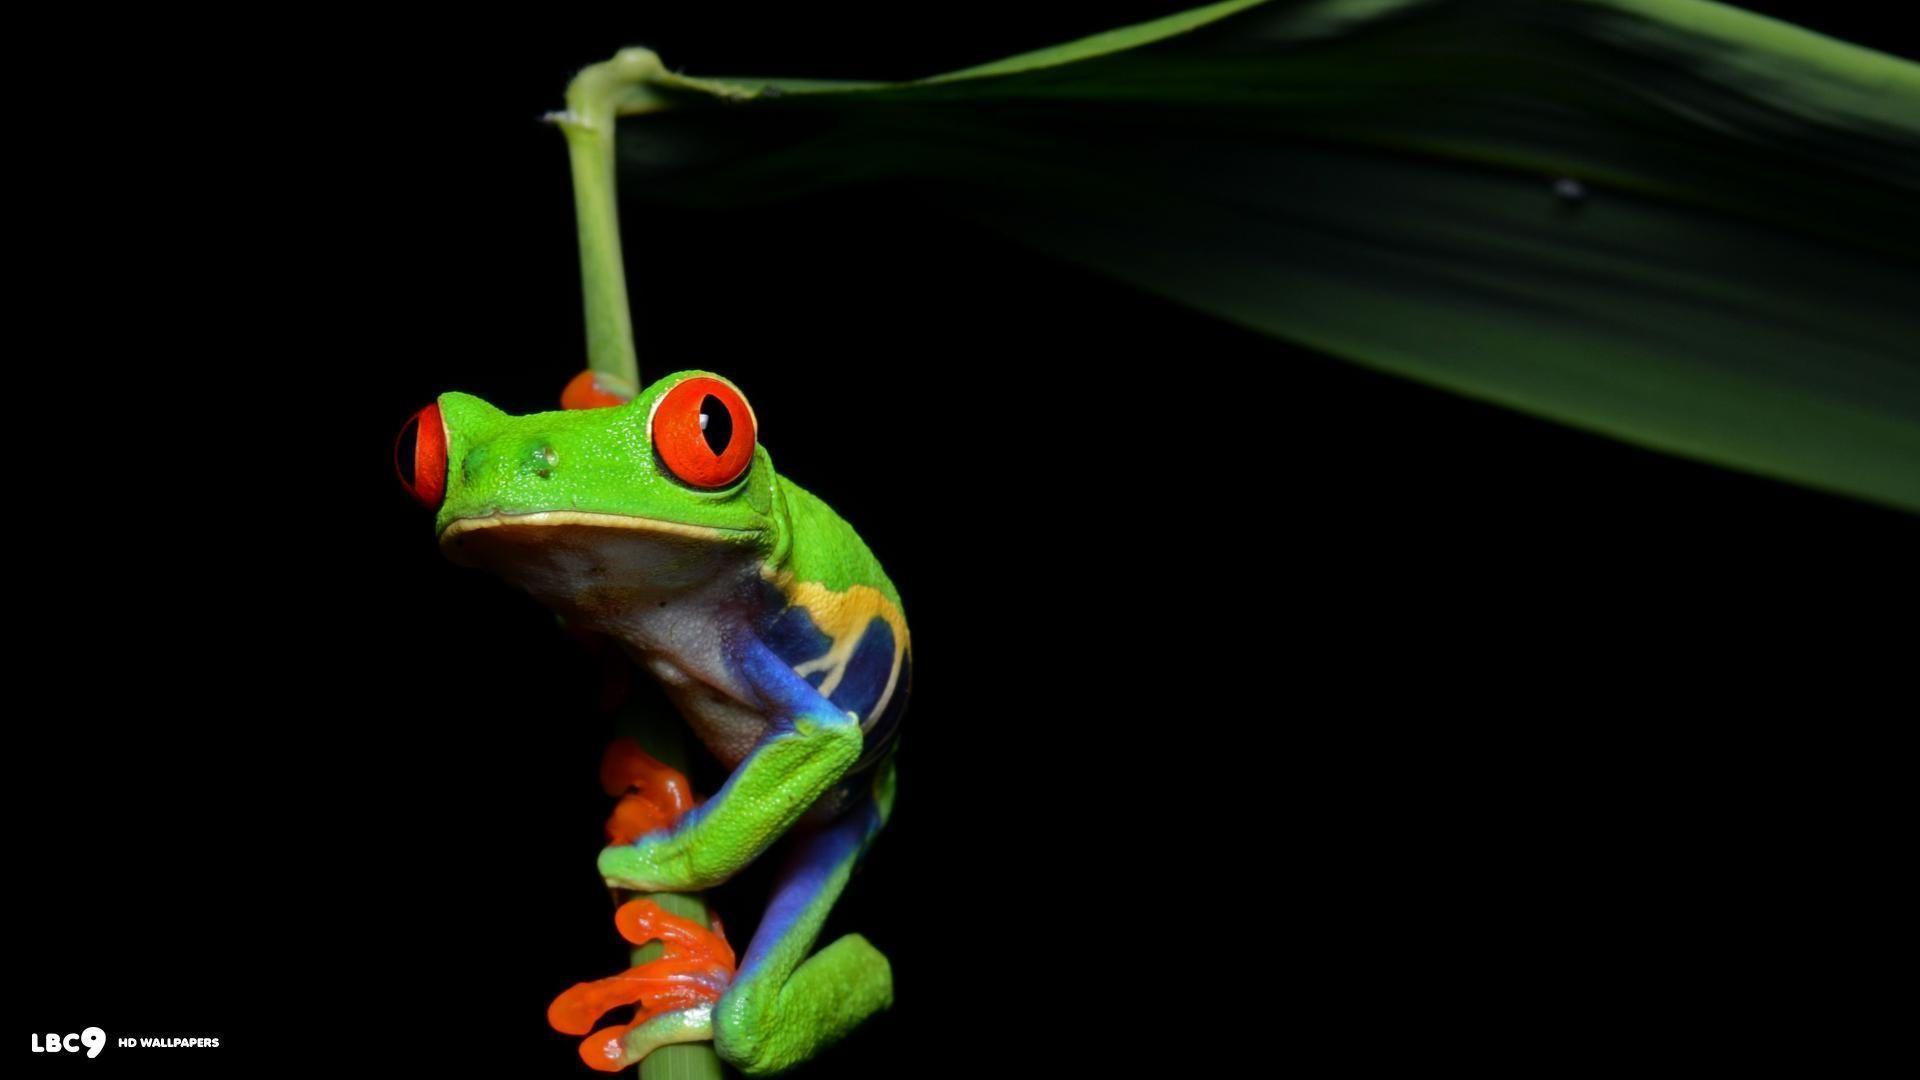 Frog Wallpaper 11 86. Reptiles And Amphibians HD Background